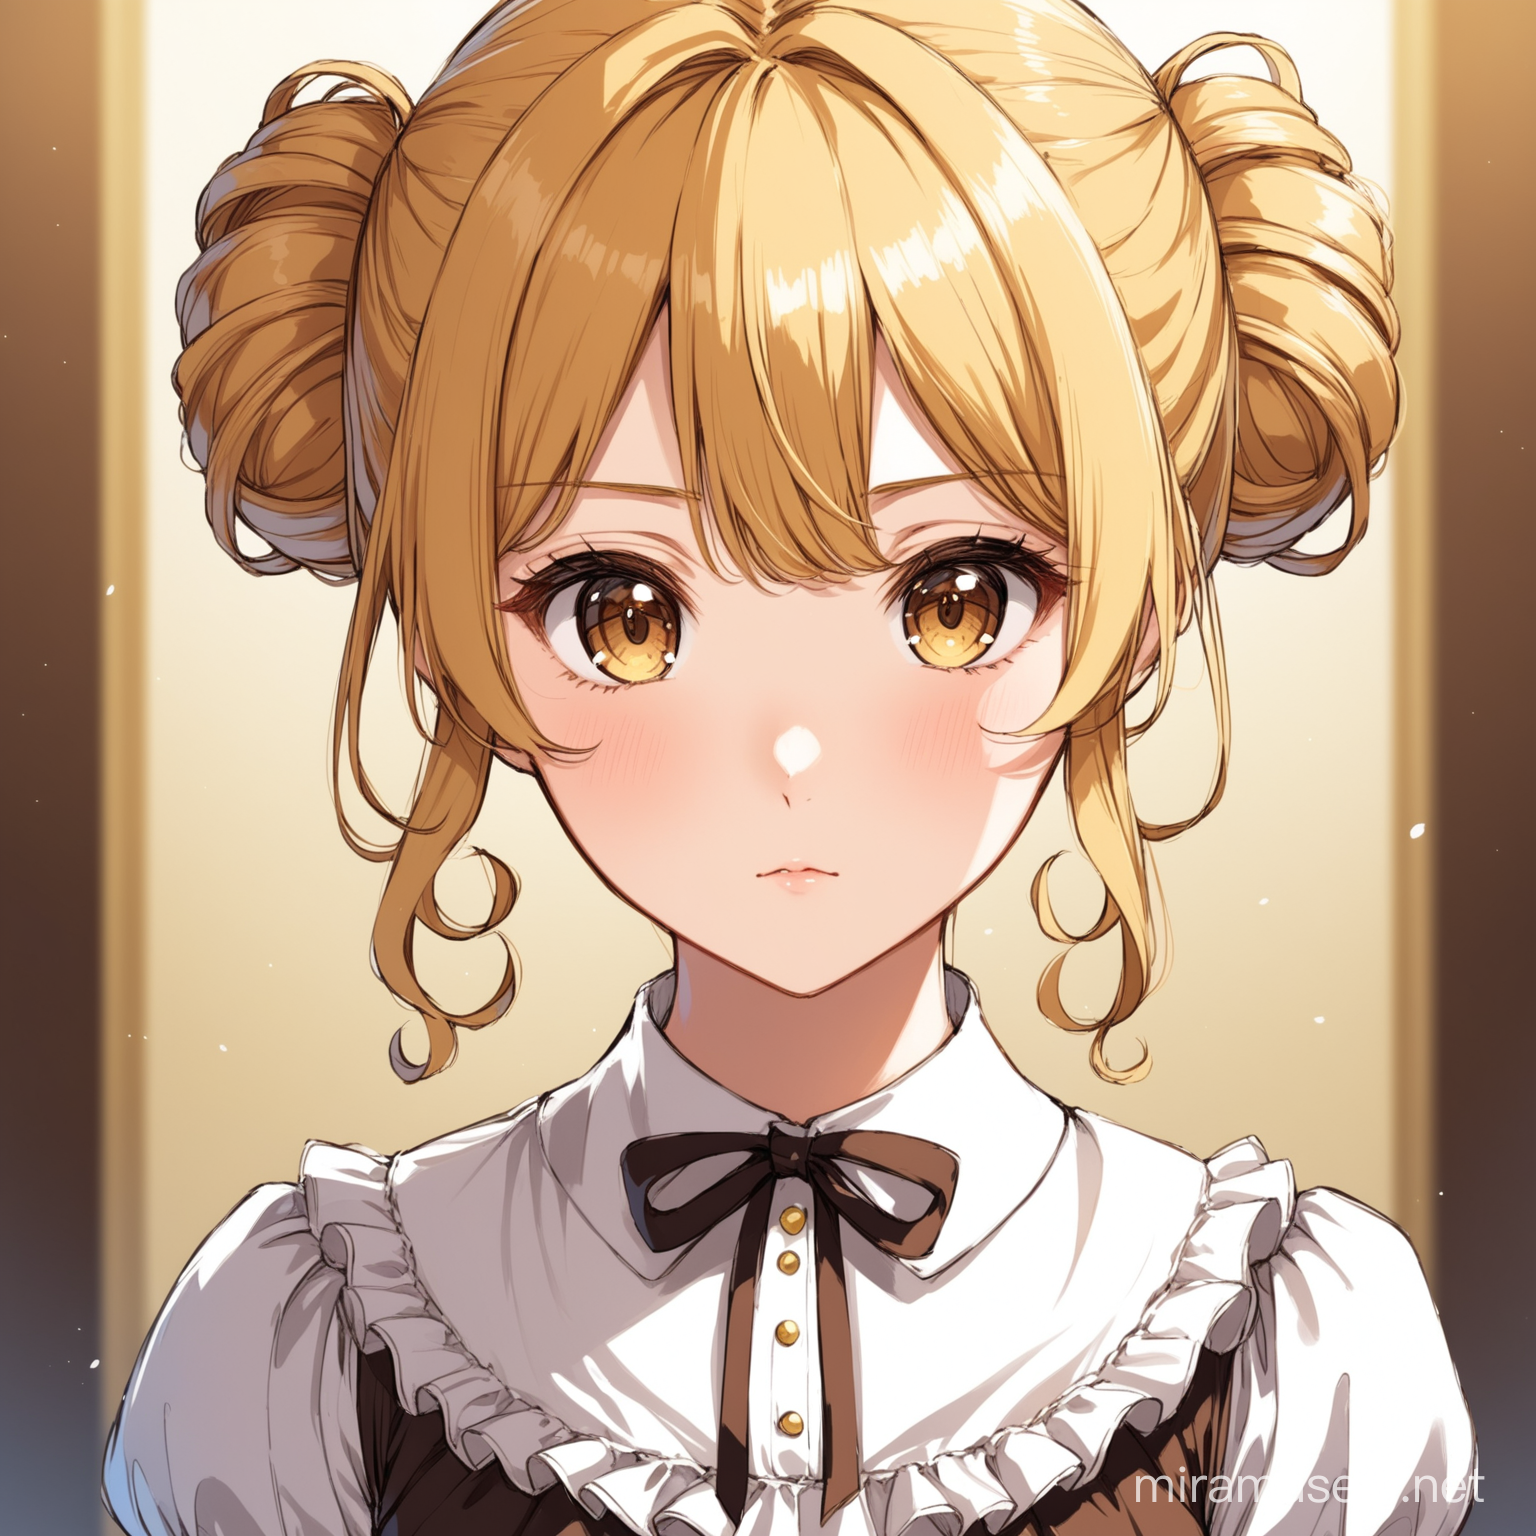 Teenage girl, golden blonde hair in a bun with curly hairs hanging down around her face, brown eyes, maiden 18th dress, anime style, front facing, looking into the camera,